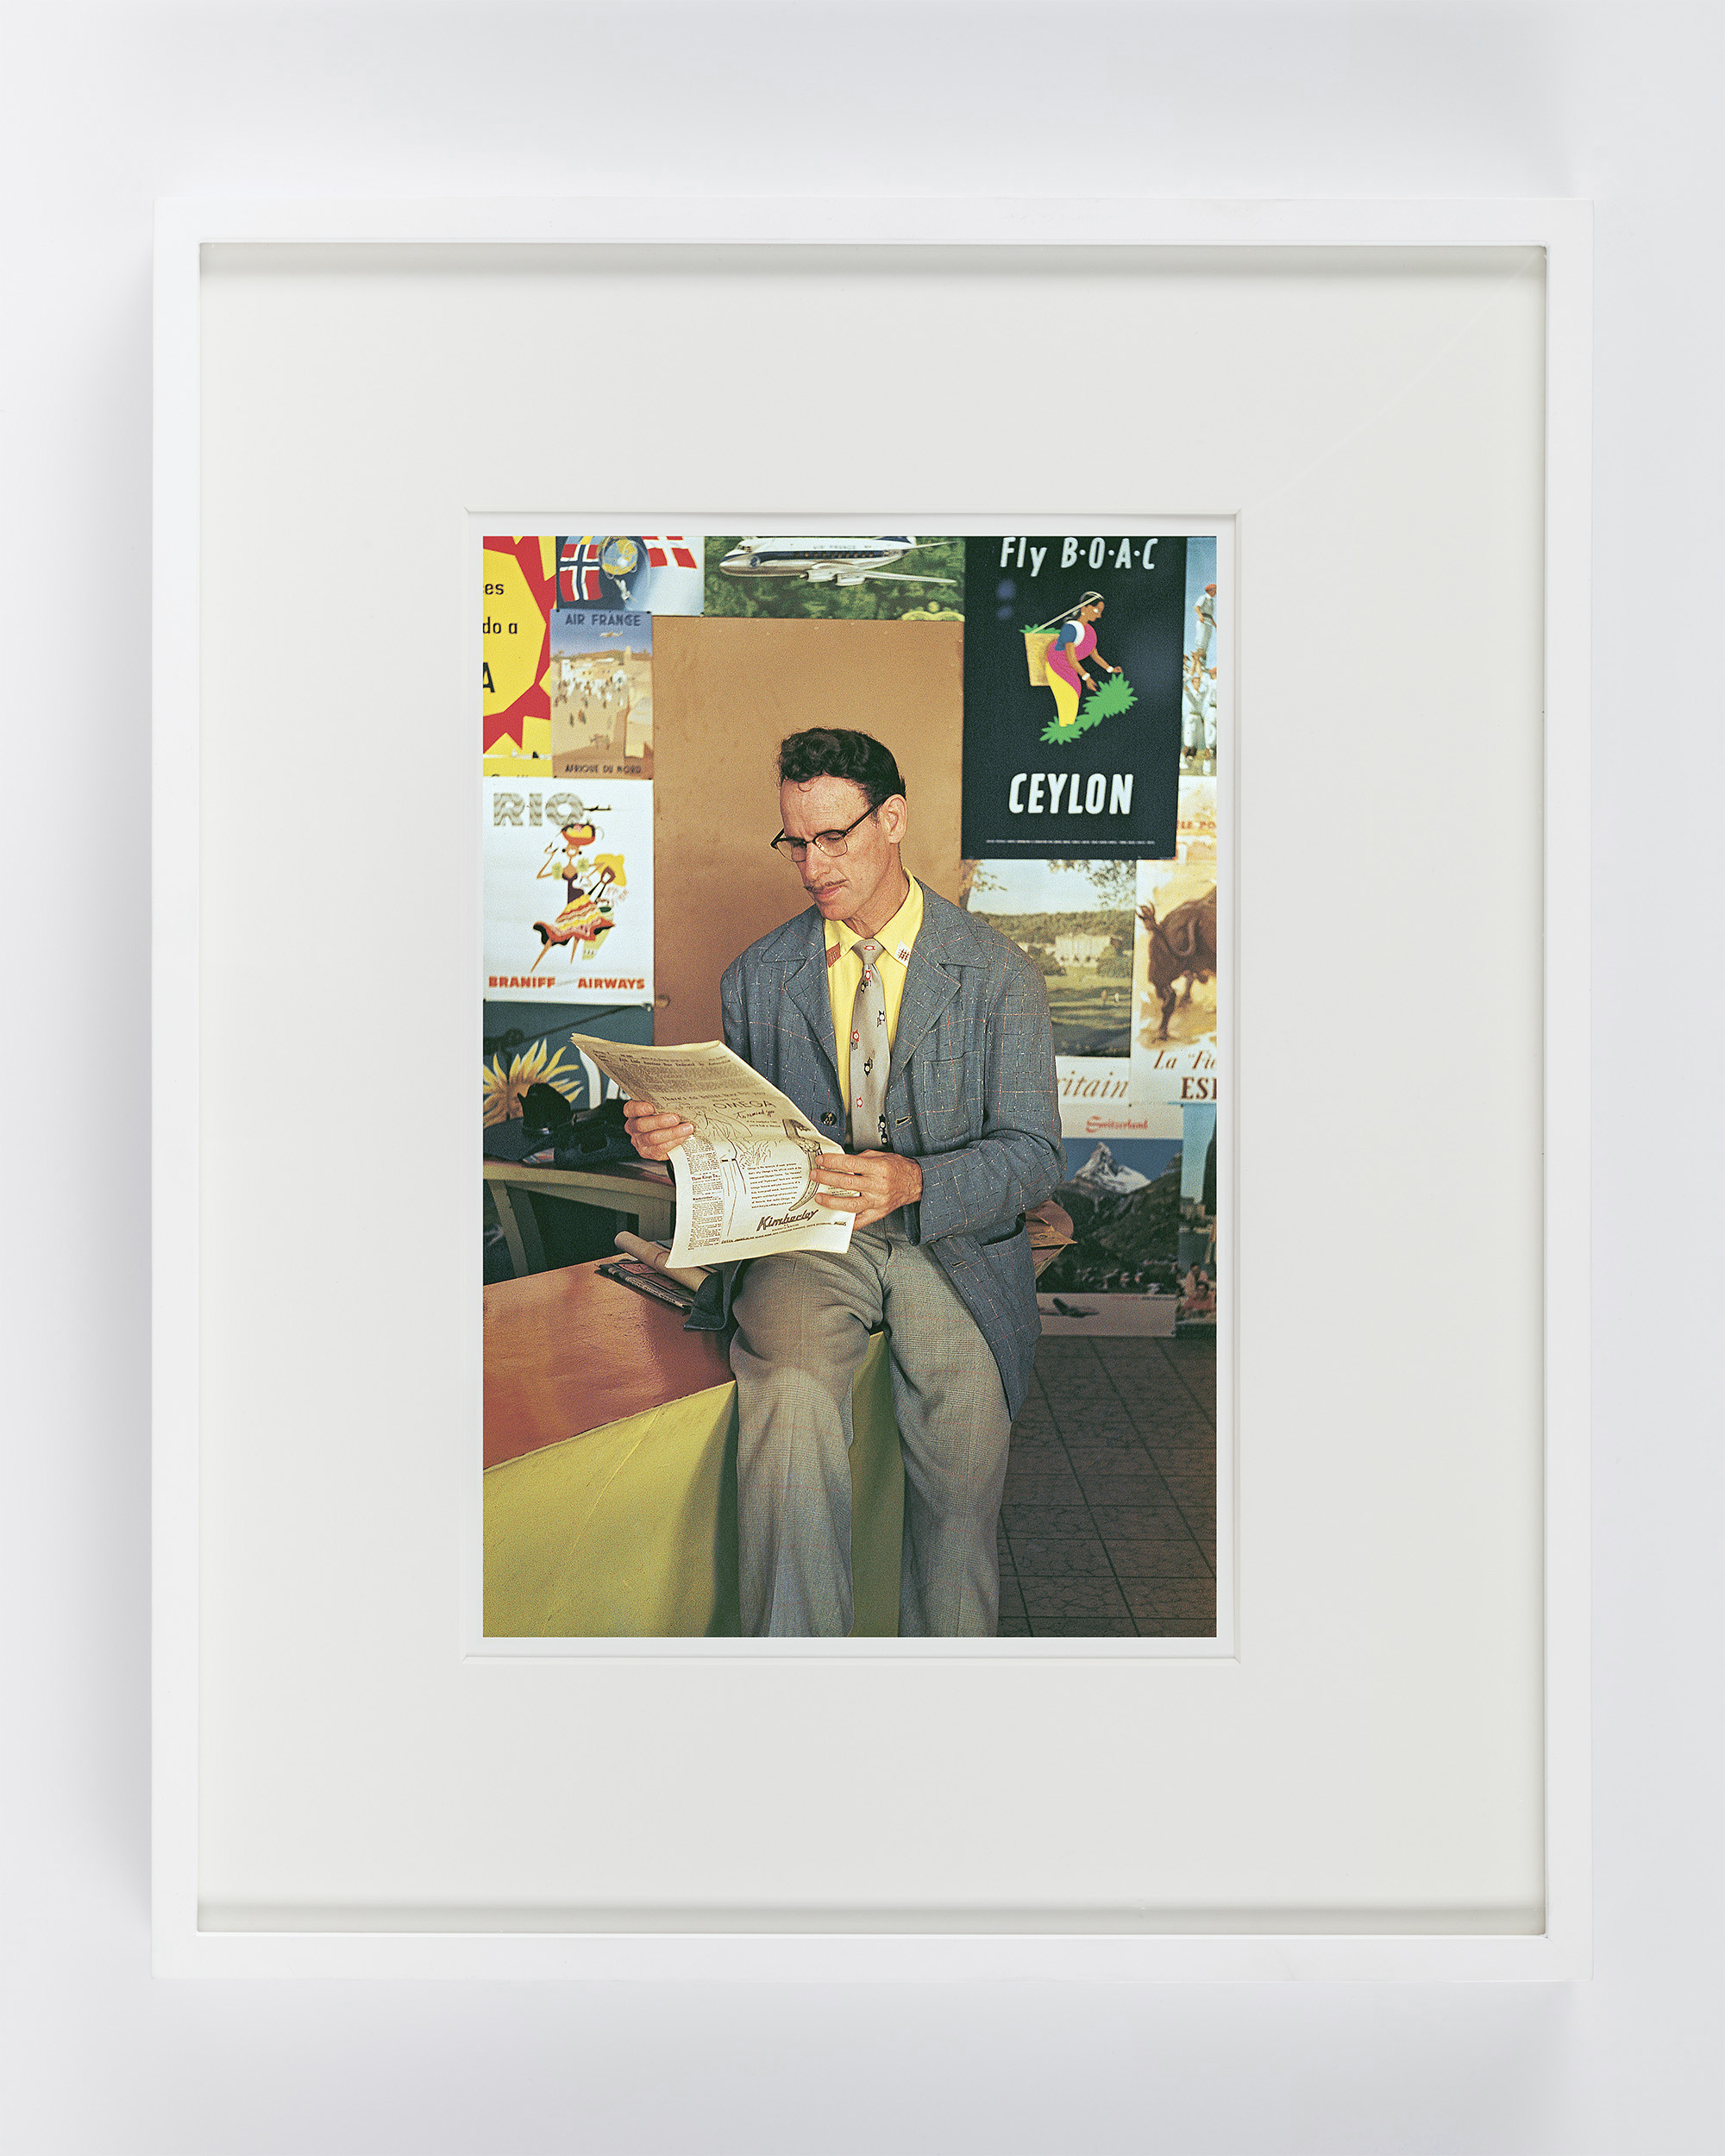 Paul Outerbridge
Man at Travel Agency, Mexico, c.1950
CarbroArt™ digital pigment print process, by Steidl in Göttingen, 2018
Arches 88, 300 gsm 100% cotton acid-free paper
16“ x 20“ framed Edition of 25